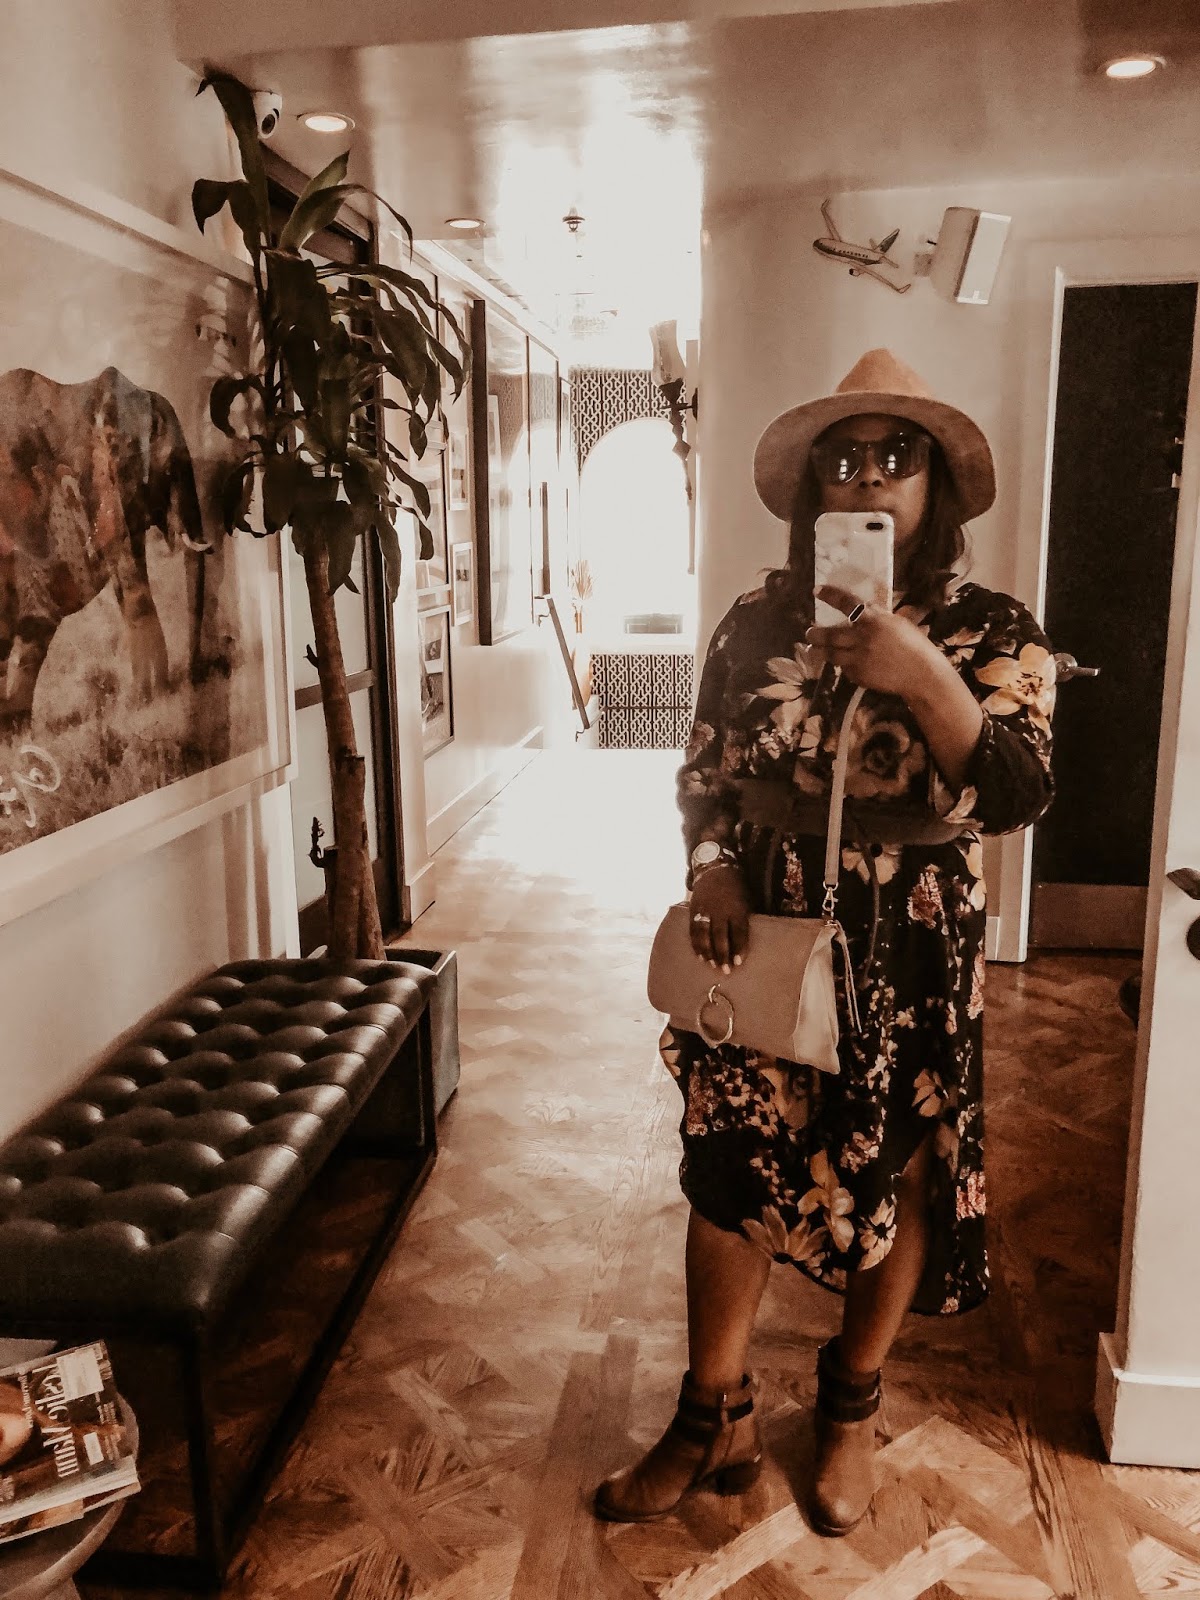 beverly-hills-california-crescent-hotel-hallway-mirror-selfie-five-things-friday-favorite-links-around-the-web